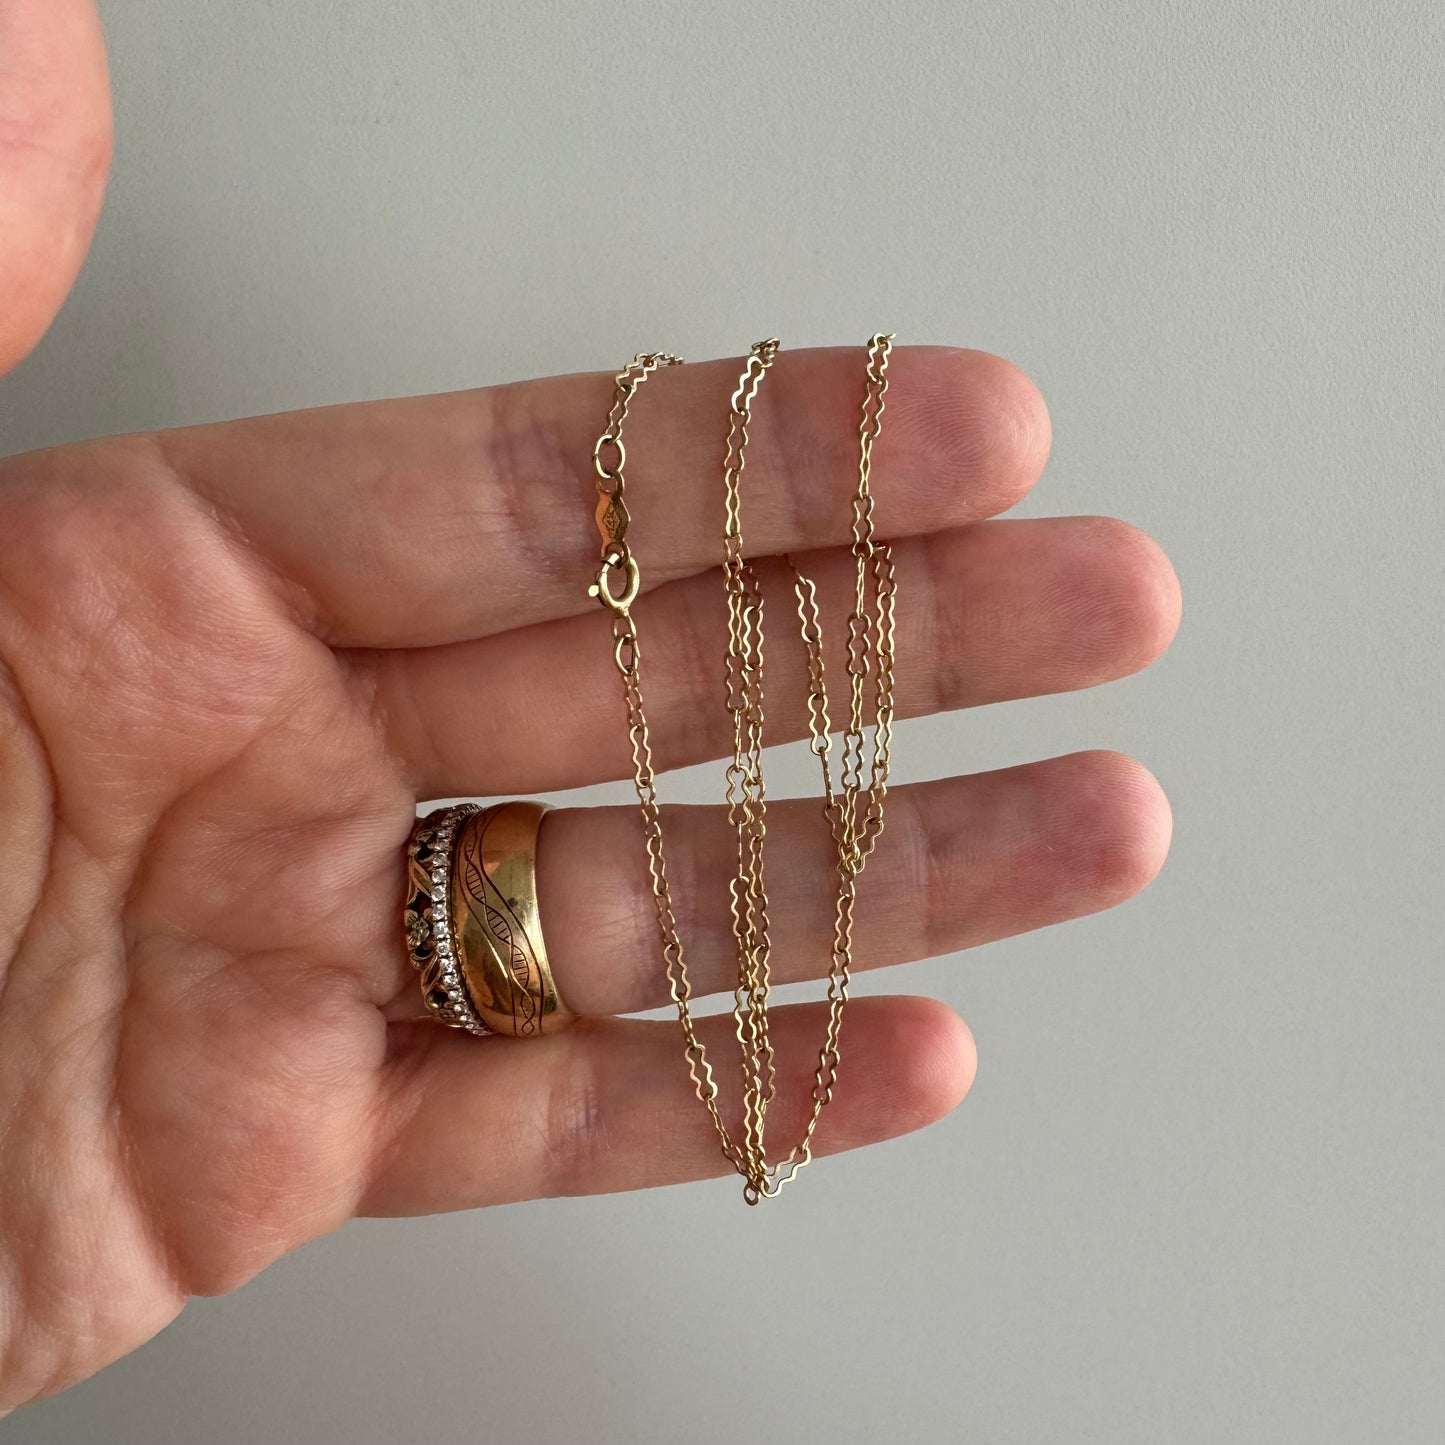 V I N T A G E // almost peanut / 14k yellow gold fancy link paperclip chain / 15.25"